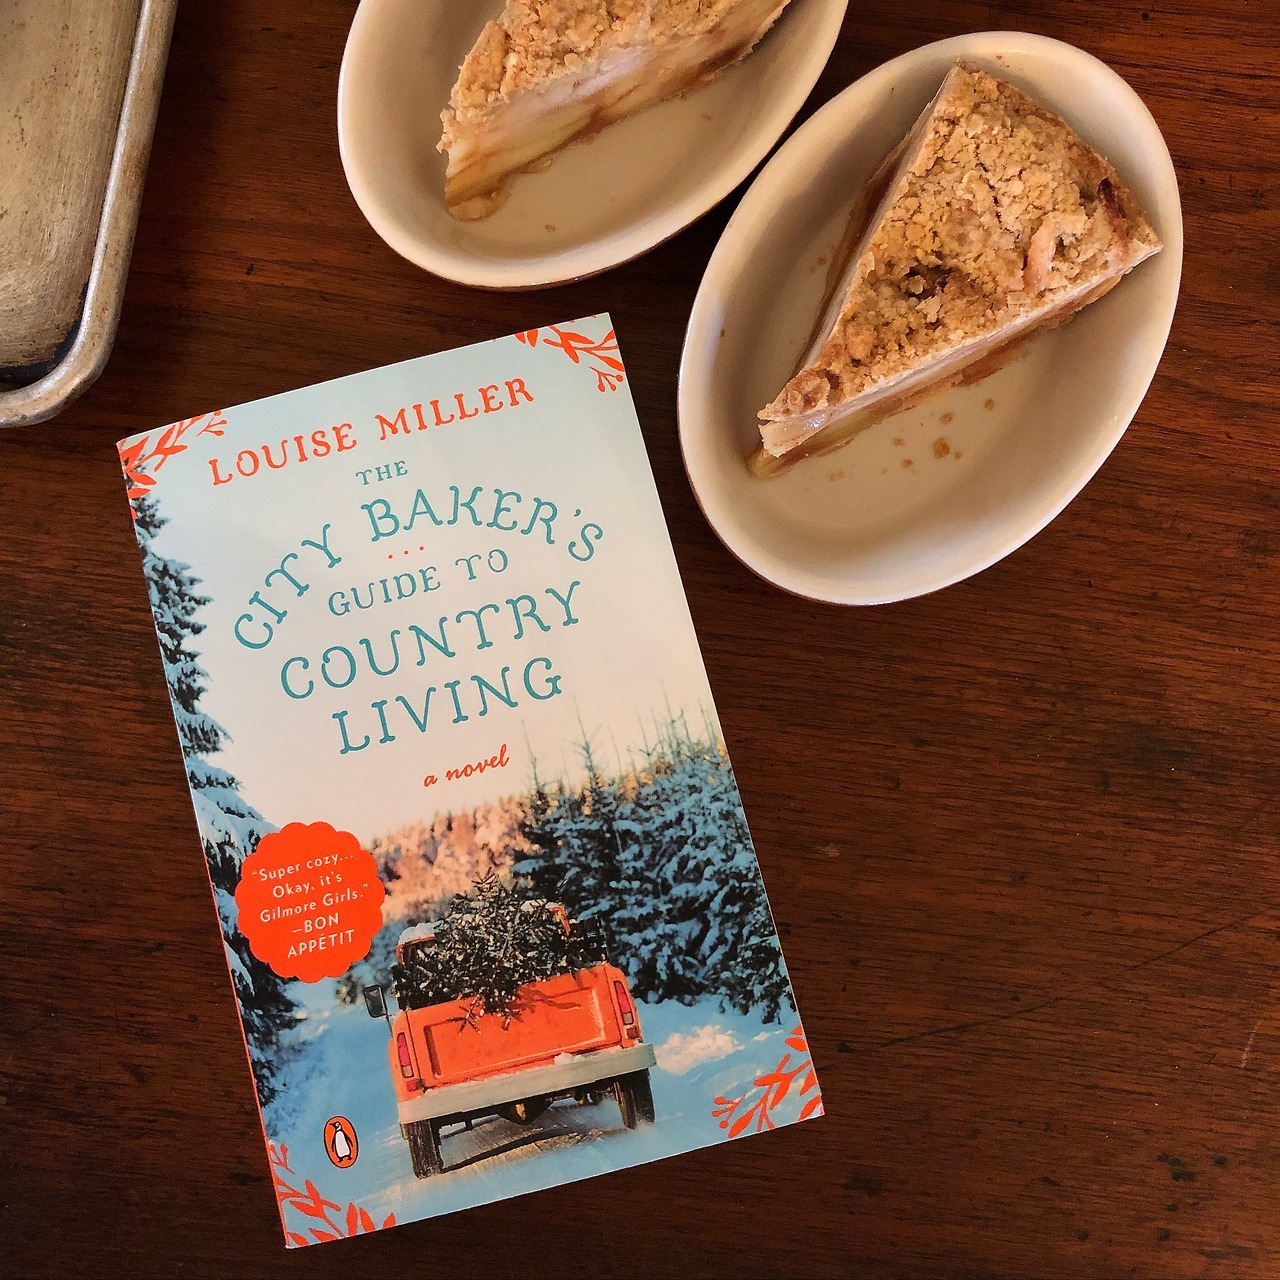 Louise Miller — The paperback edition of The City Baker's Guide to